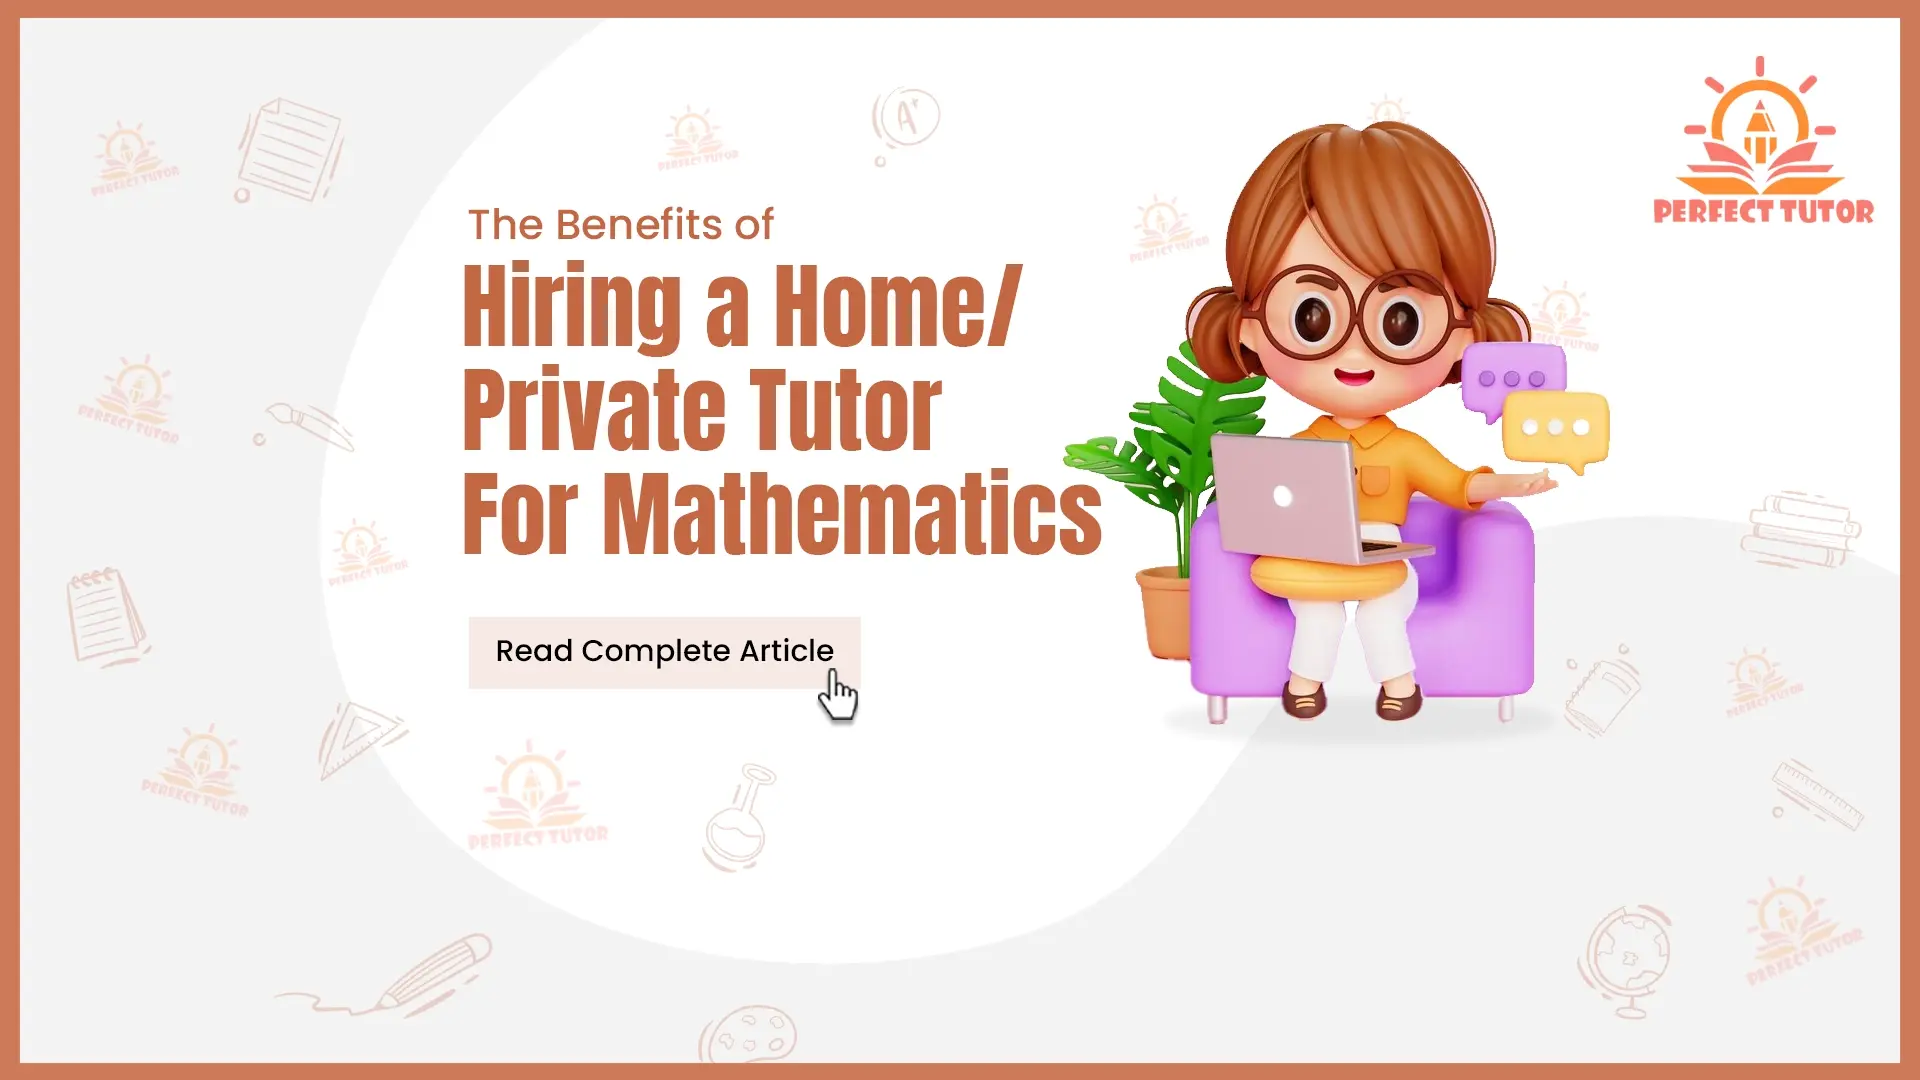 The Benefits of Hiring a Home/Private Tutor for Mathematics